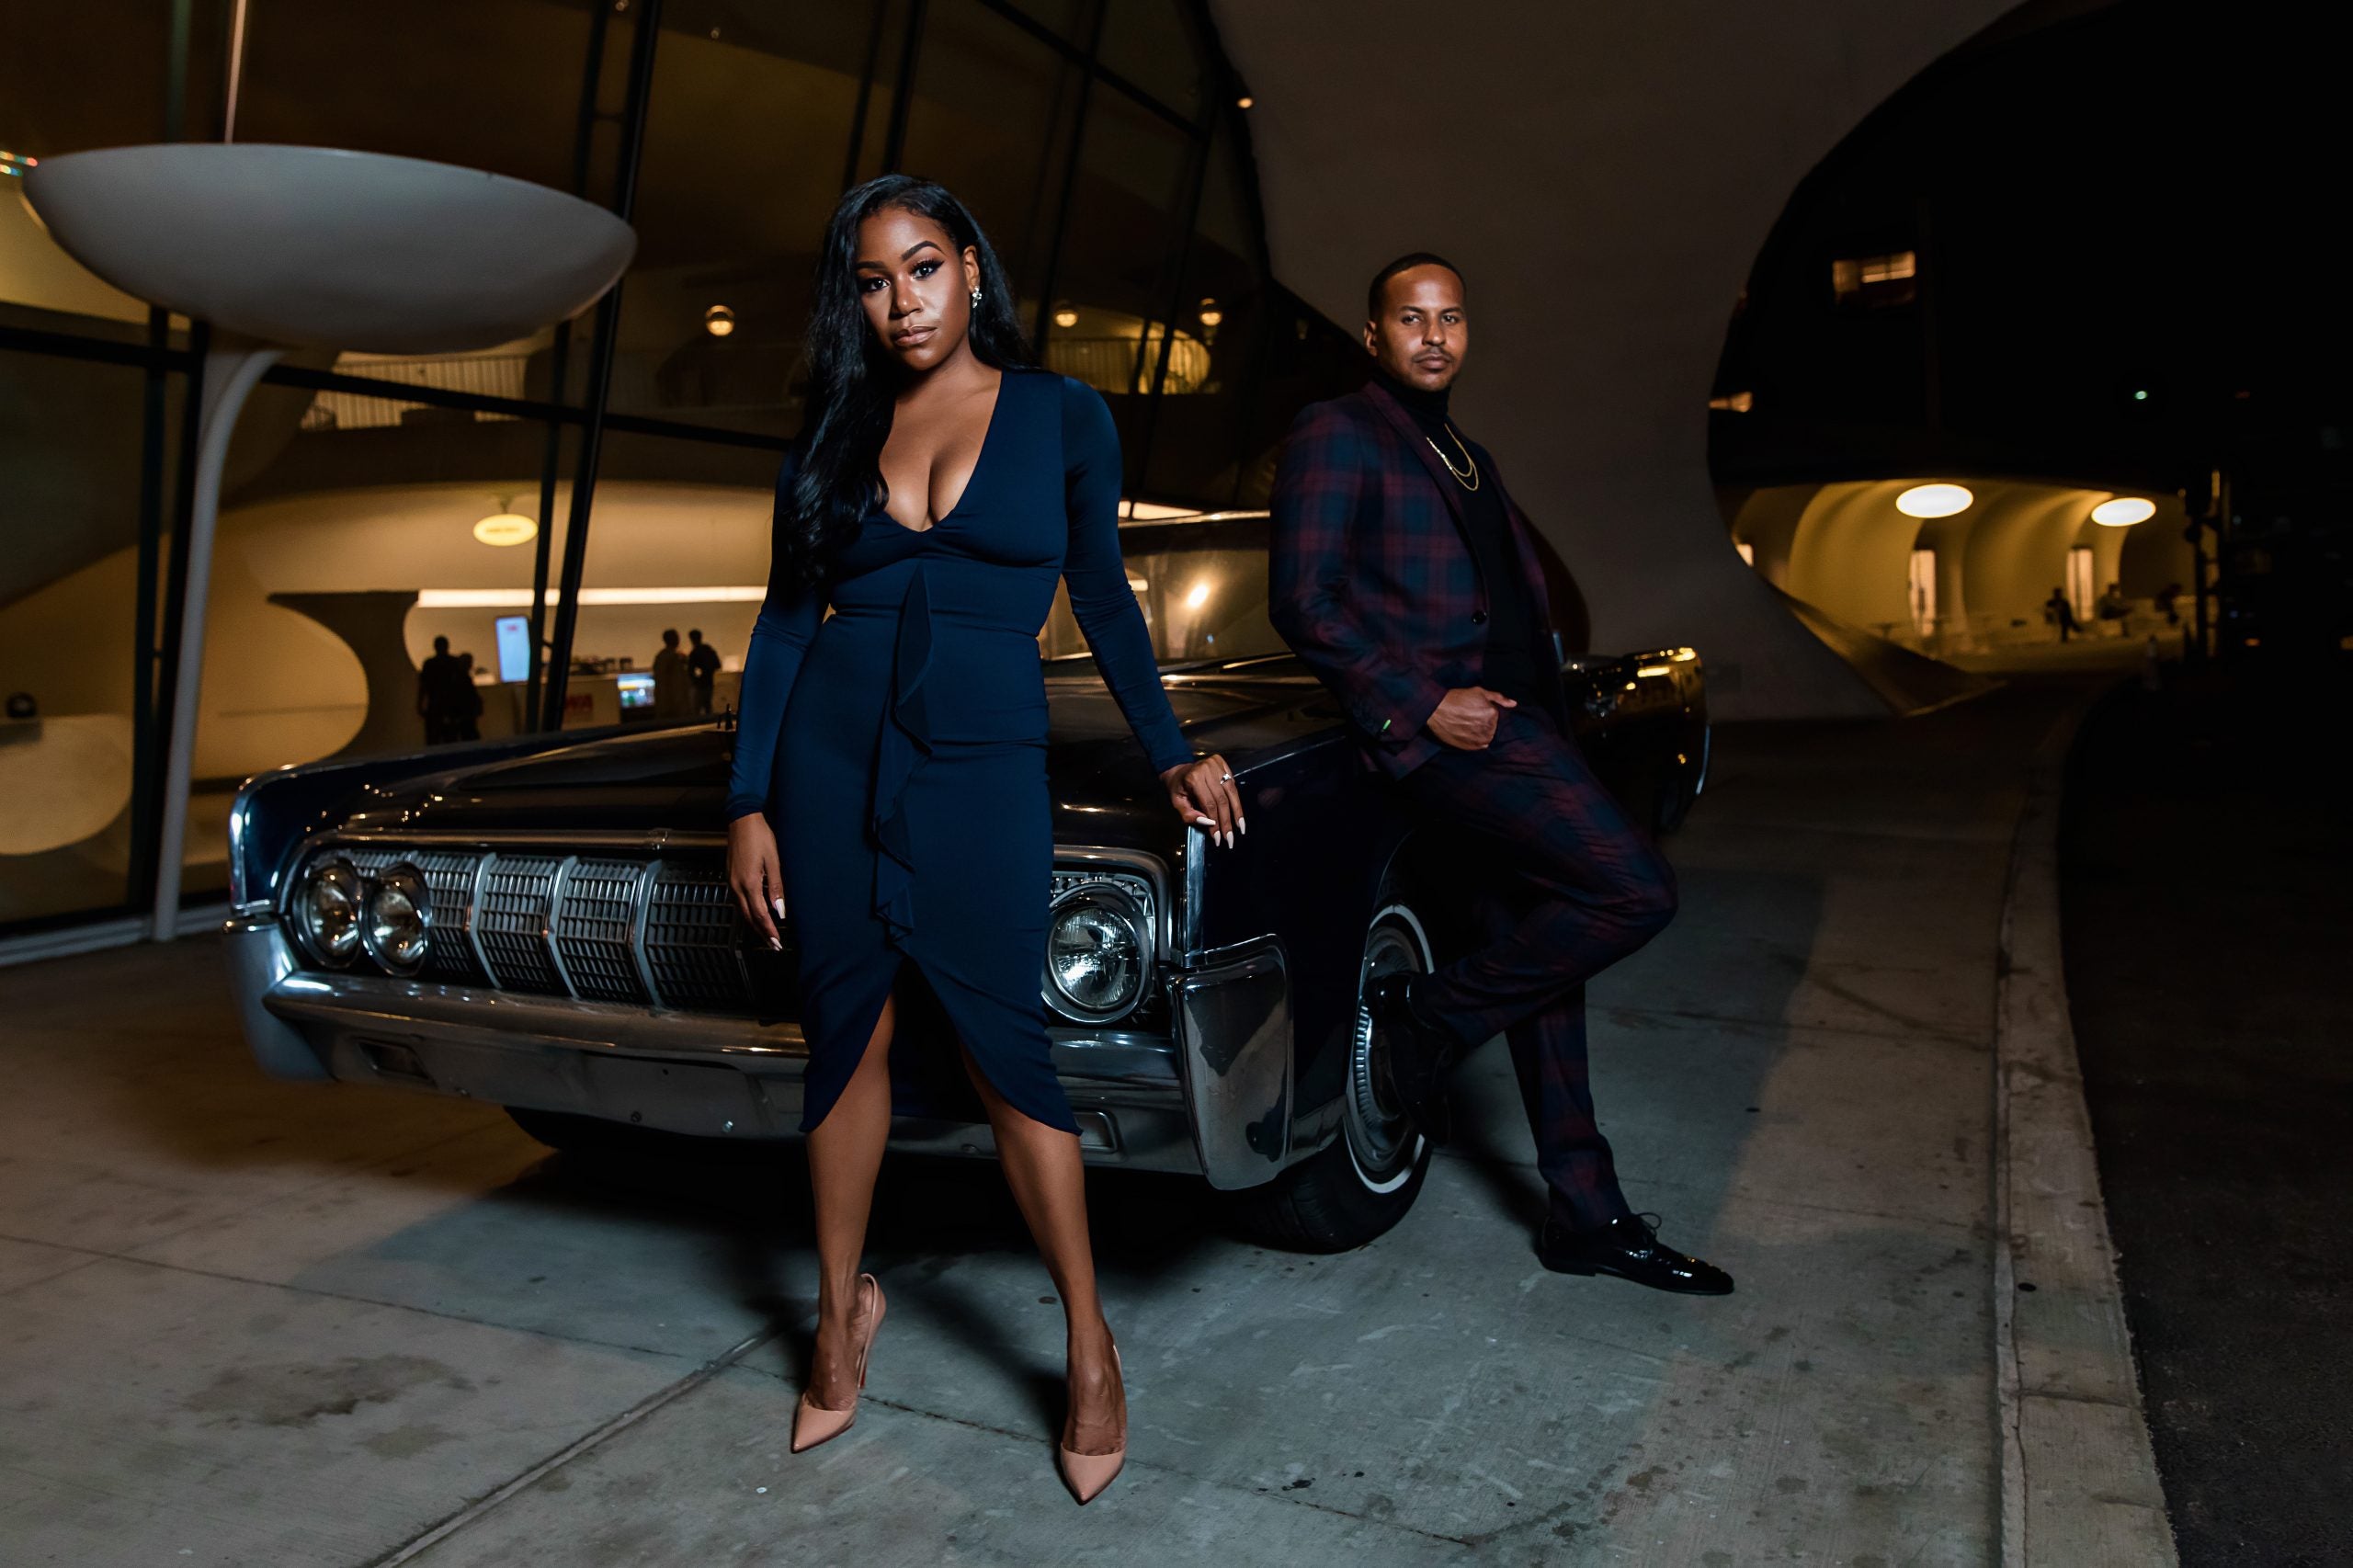 Jahira And Chad Slayed Their Engagement Photo Shoot. Up Next? A Juneteenth Wedding.